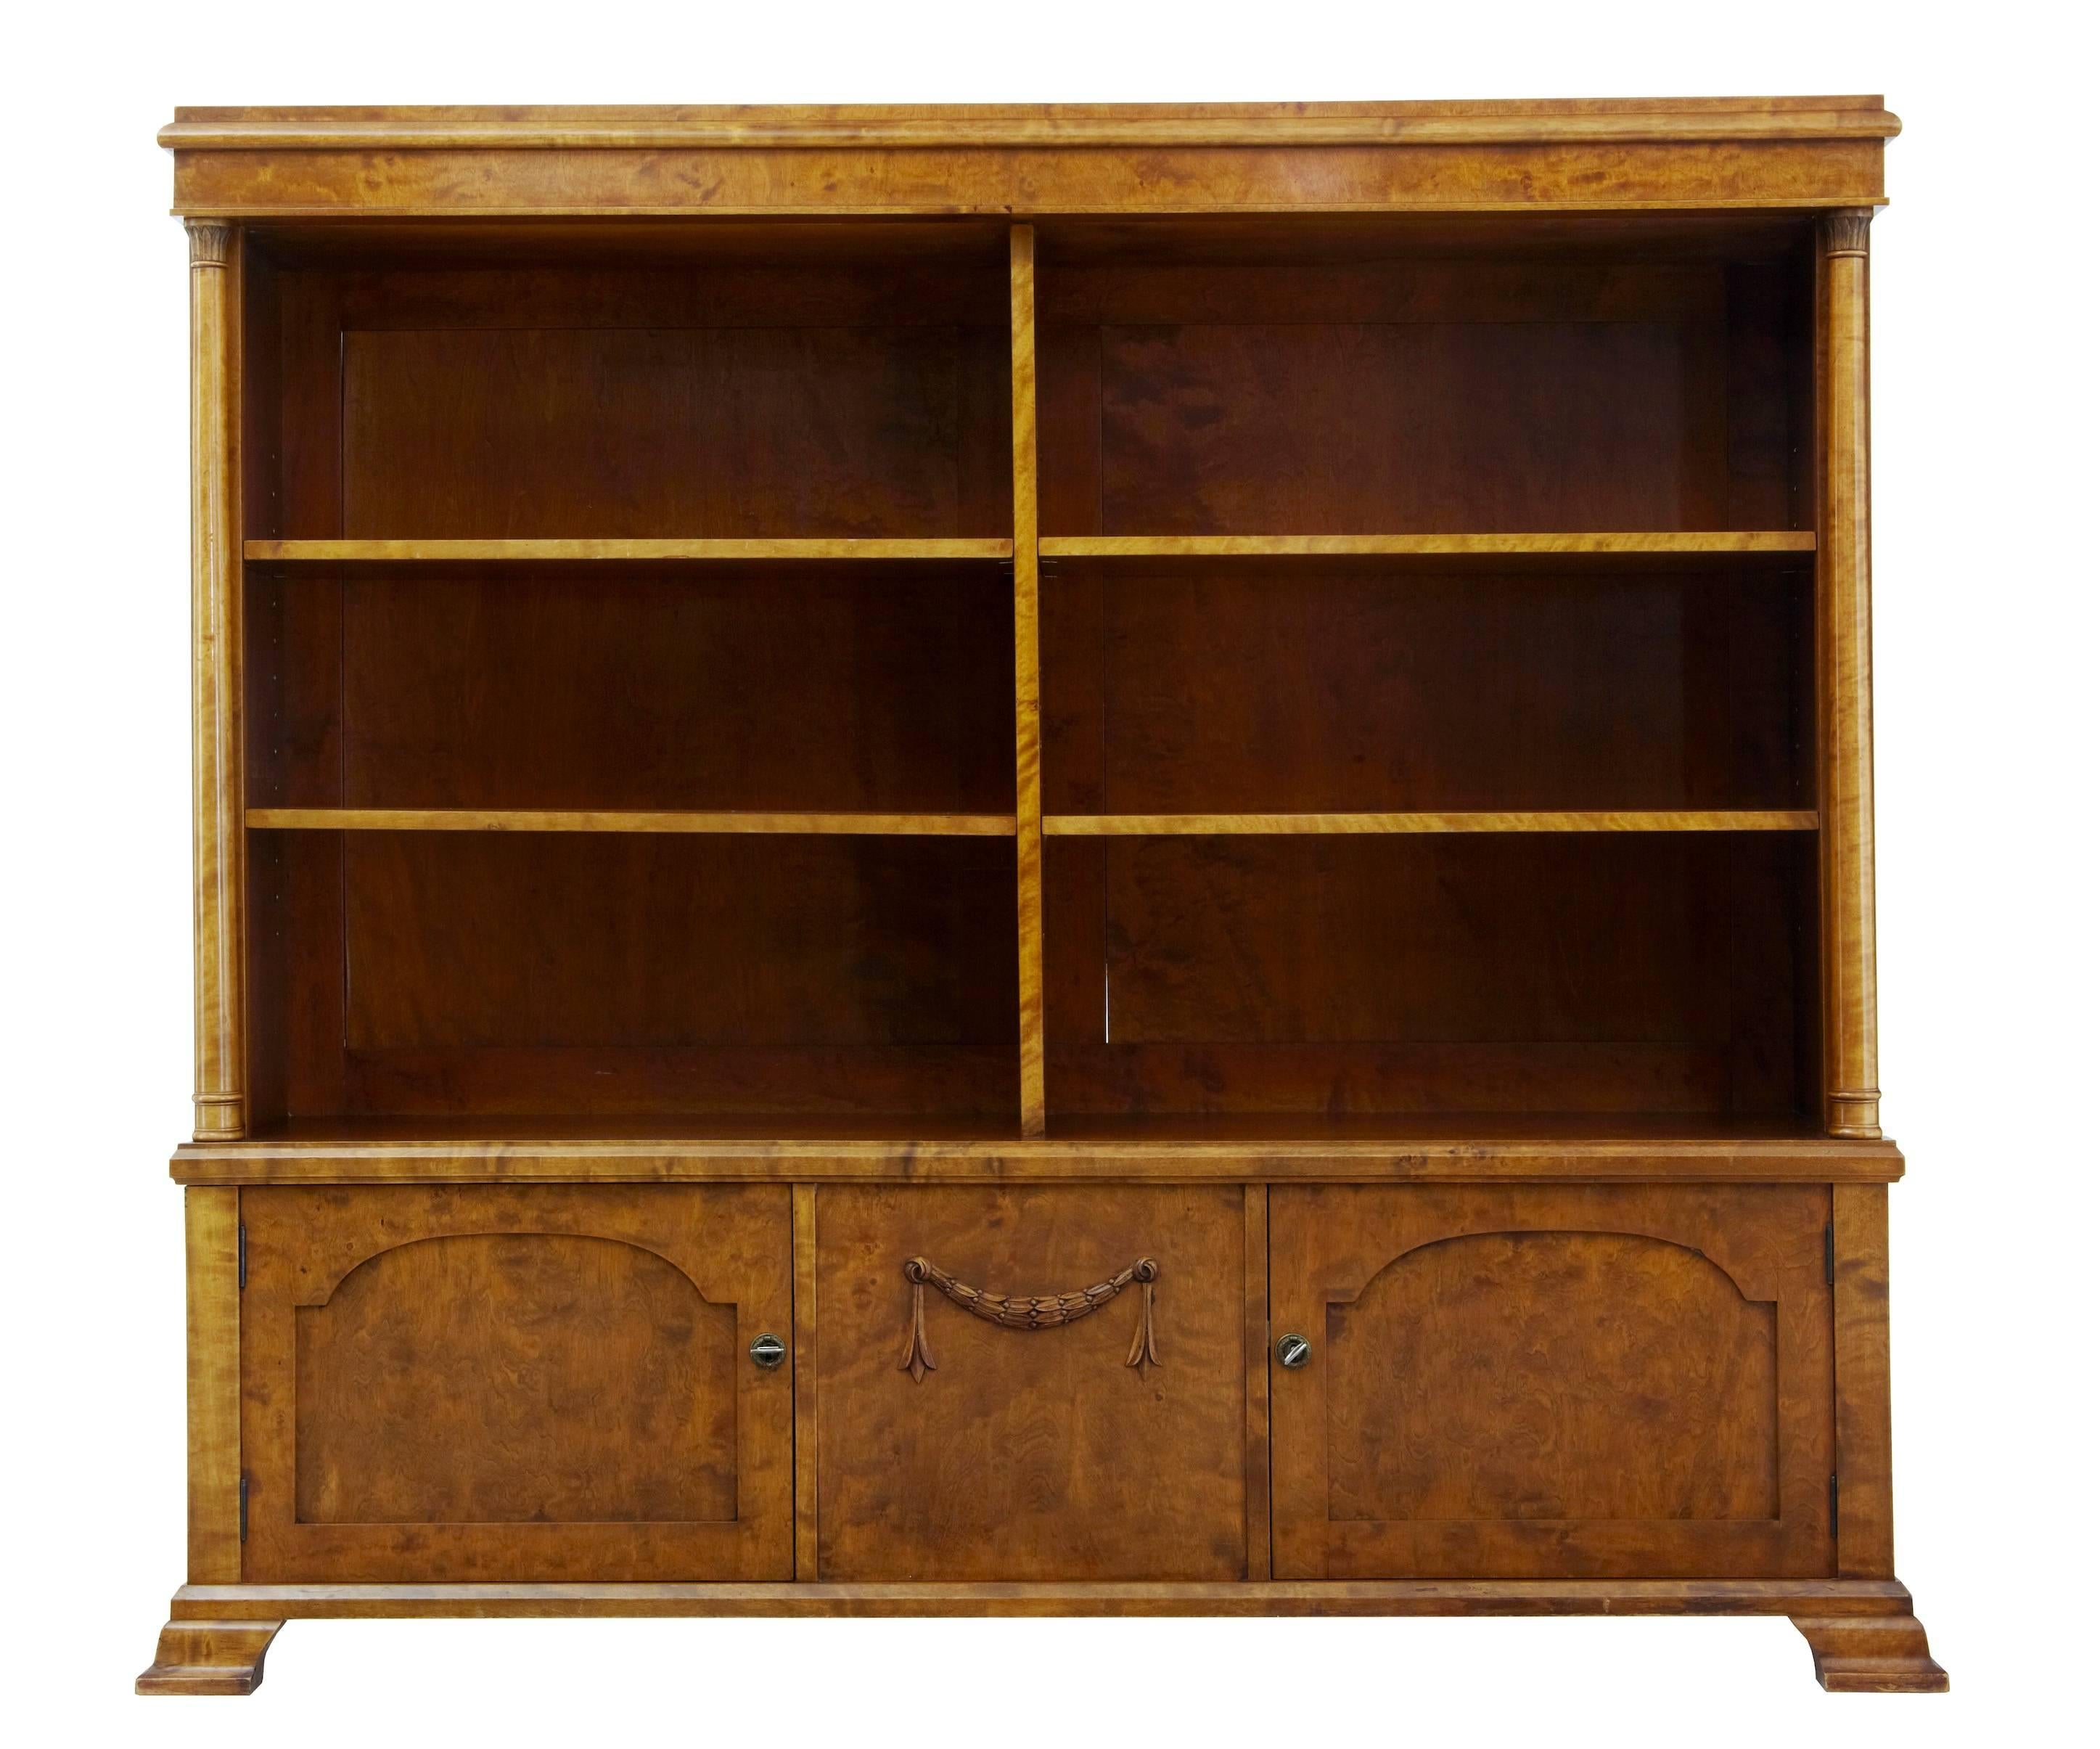 Beautiful rich birch open bookcase, circa 1910.
Four adjustable shelves with a central partition, below a central panel with carved applied swag, flanked either side a single door cupboard.
Column detail runs up both front sides.

Height: 54